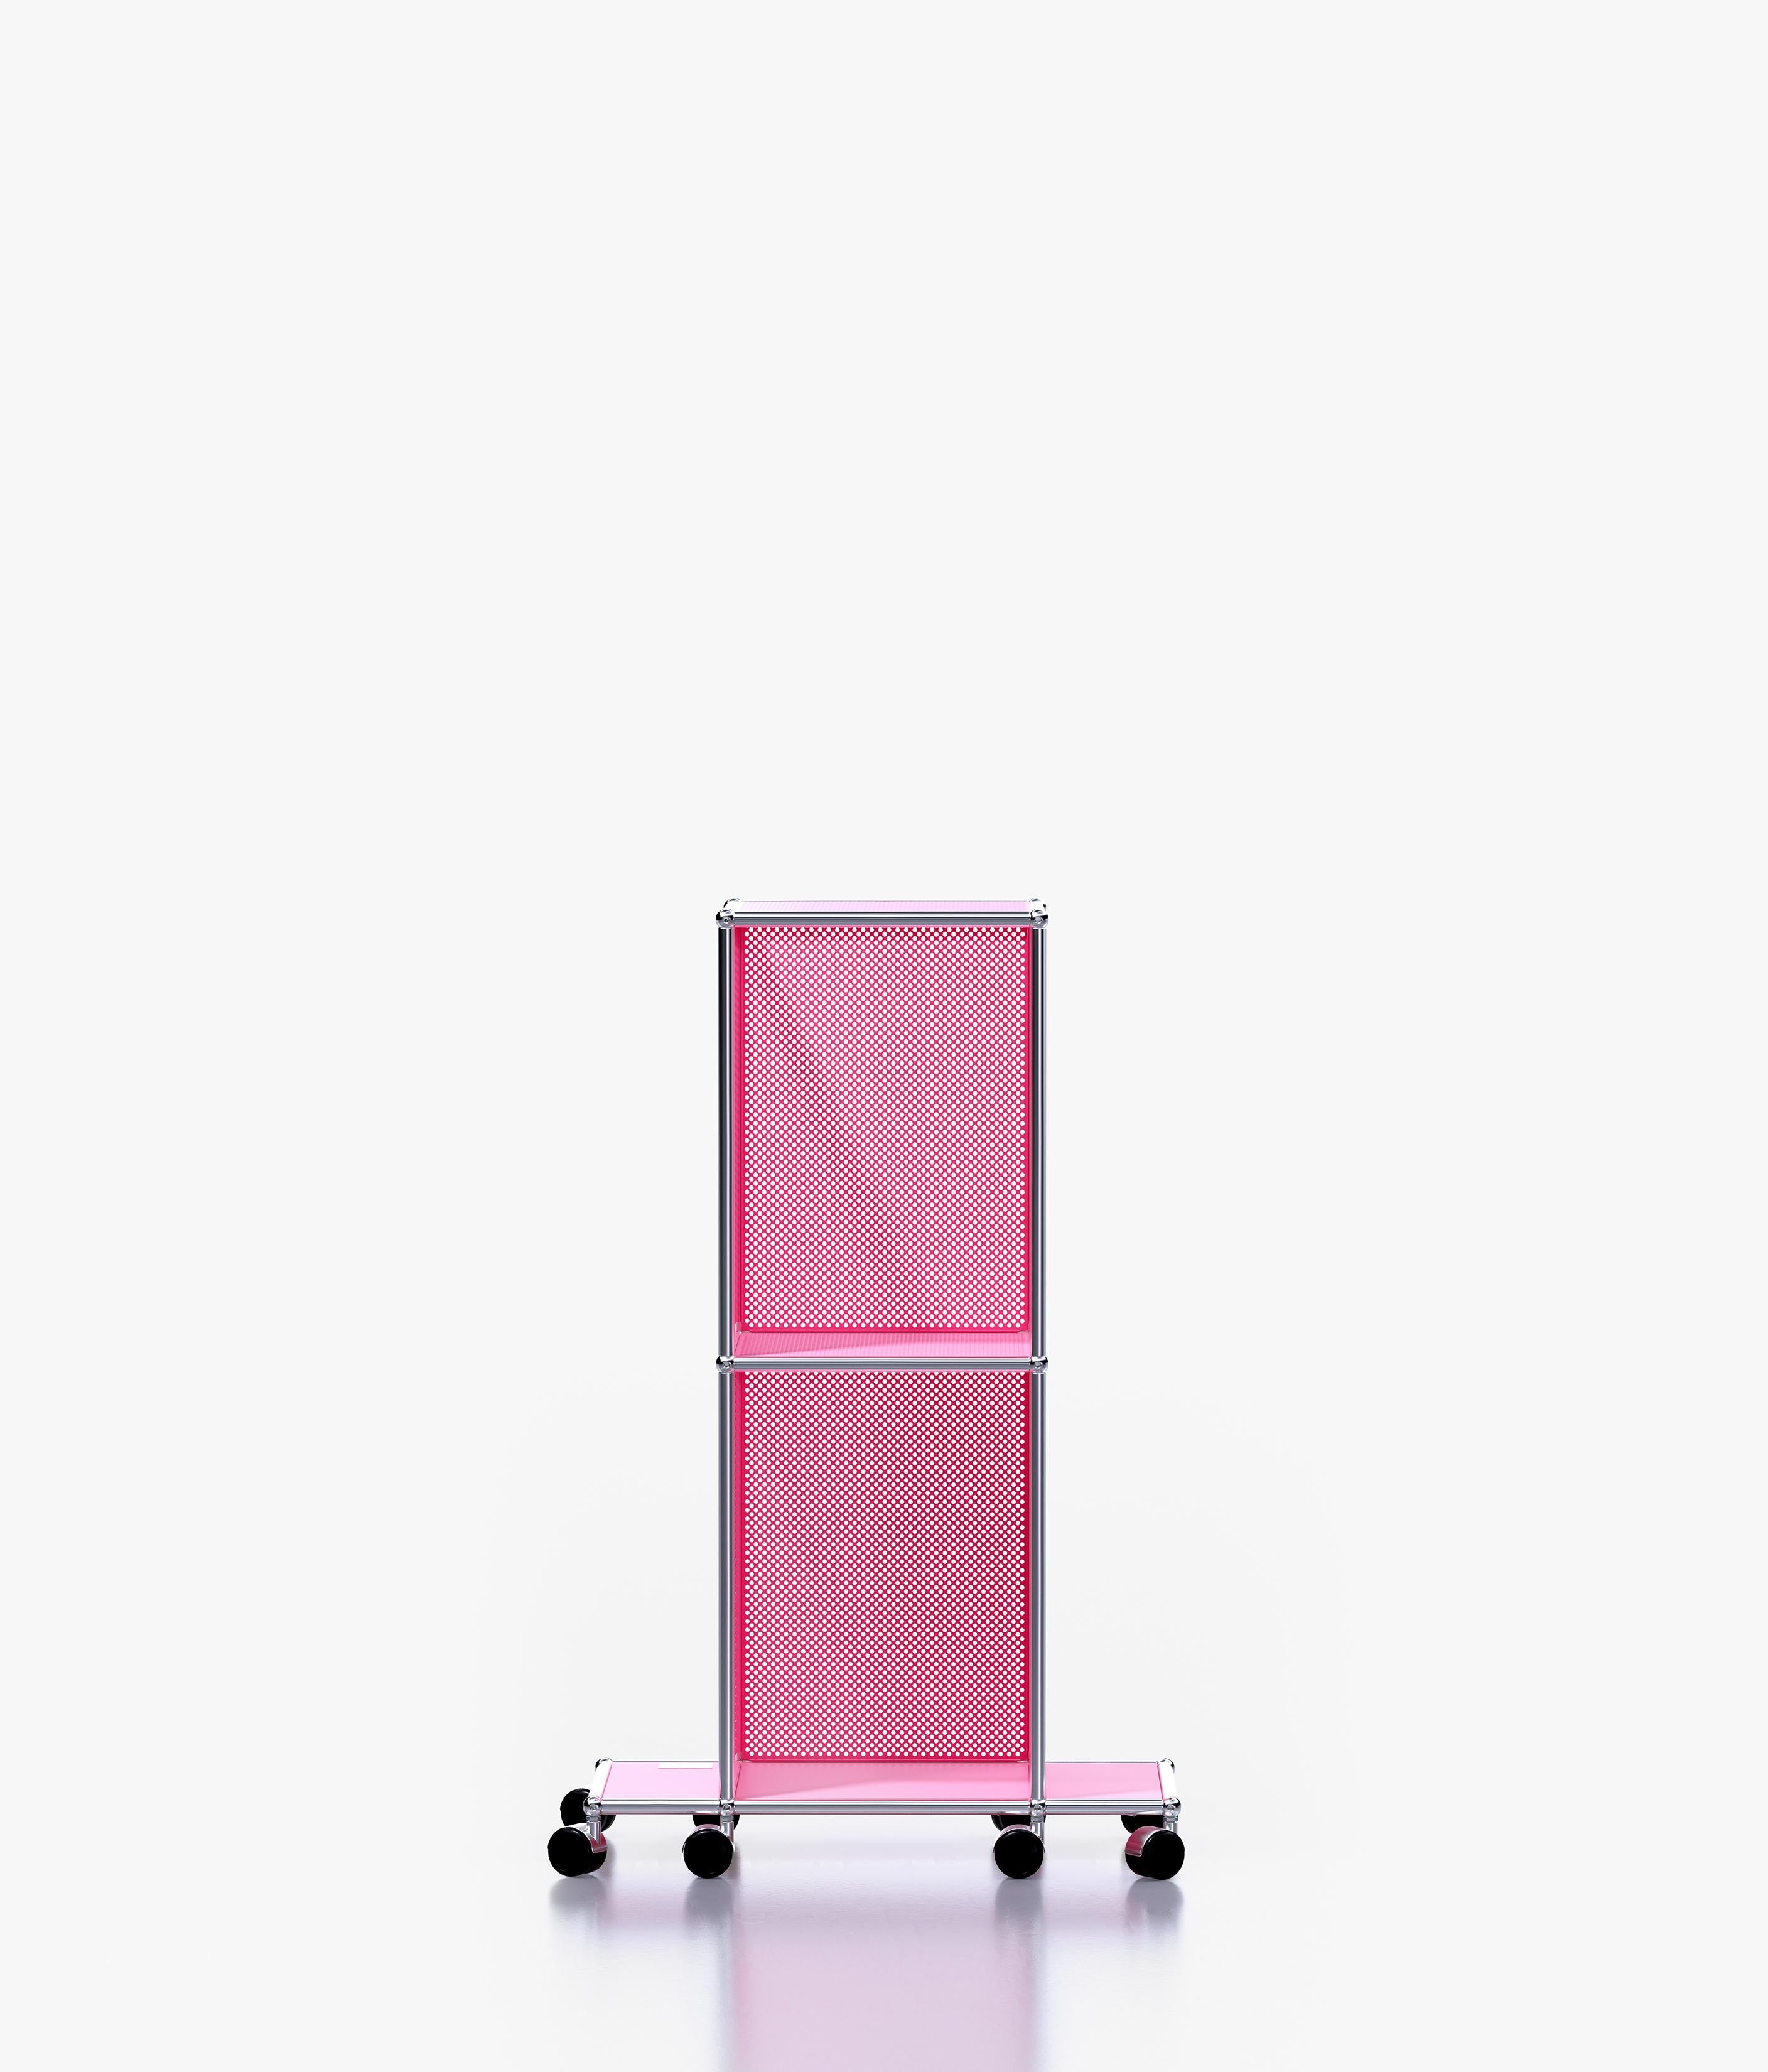 Swiss Limited Edition Usm New Downtown Pink Tower D 'Low-Rise' by Ben Ganz in Stock